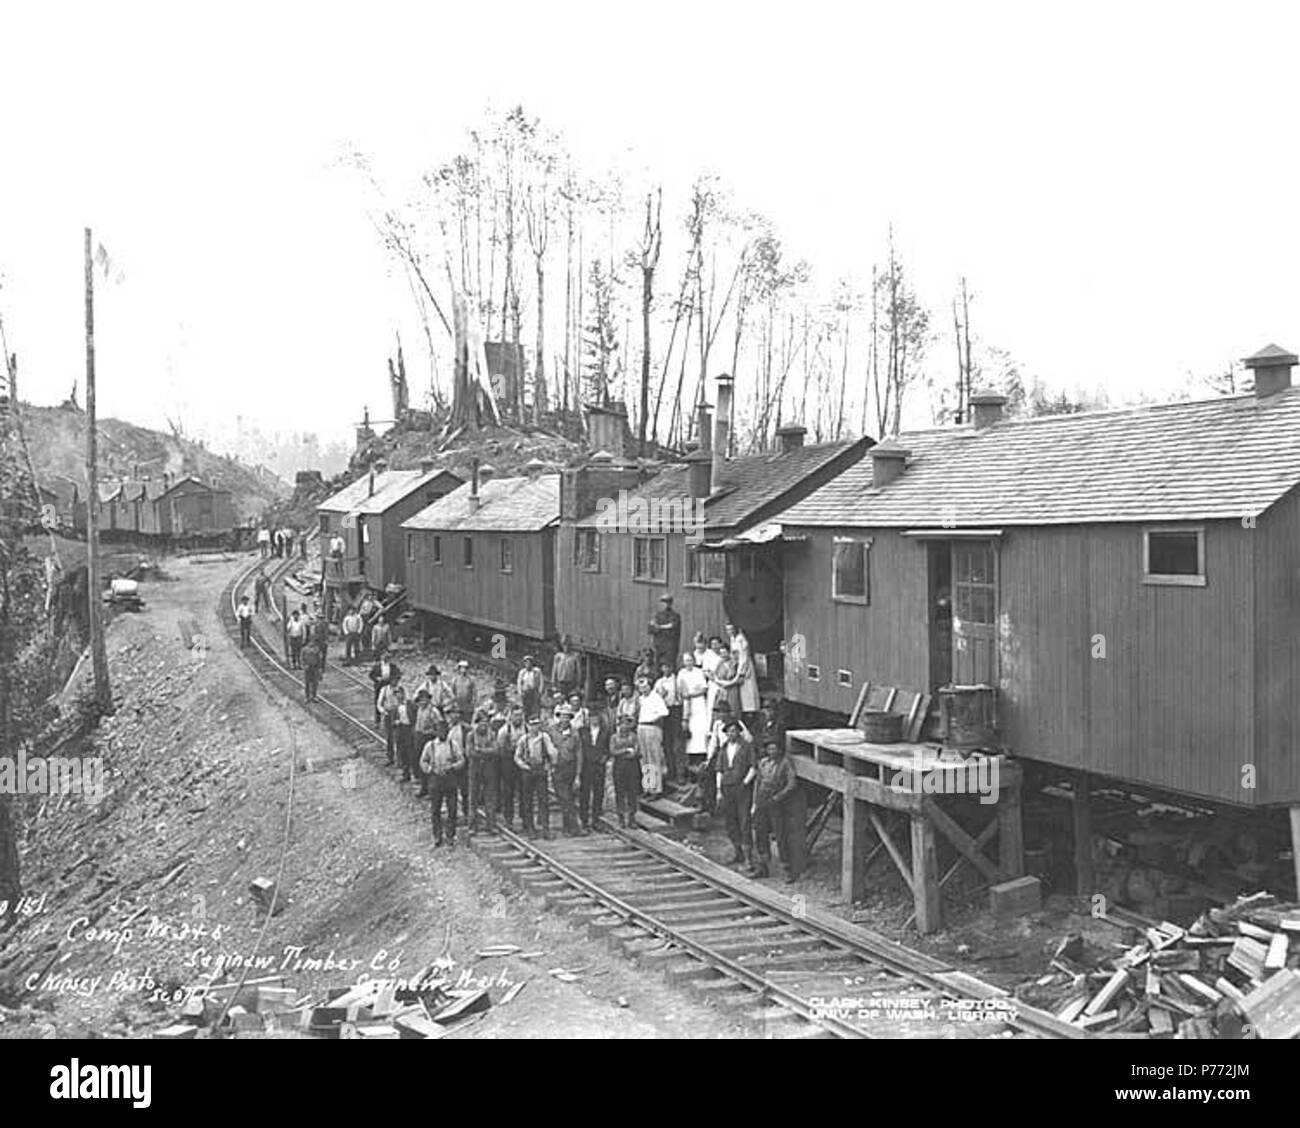 . English: Crew at camps 3 and 5, with mess hall crew standing on steps of mess hall with saw blade dinner gong, Saginaw Timber Company, Saginaw, ca. 1918 . English: Caption on image: Camp No. 3 & 5, Saginaw Timber Co., Saginaw, Wash. C. Kinsey Photo, Seattle. No. 151 PH Coll 516.3198 The Saginaw Timber Company incorporated on March 18, 1908 and organized in 1909. The company was to be capitalized at $100,000. The organizers were A J Morley and W G Hopkins. The company constructed and operated a 40 mile logging railroad in the Aberdeen area. In 1919, the company merged the E H Lester Logging C Stock Photo